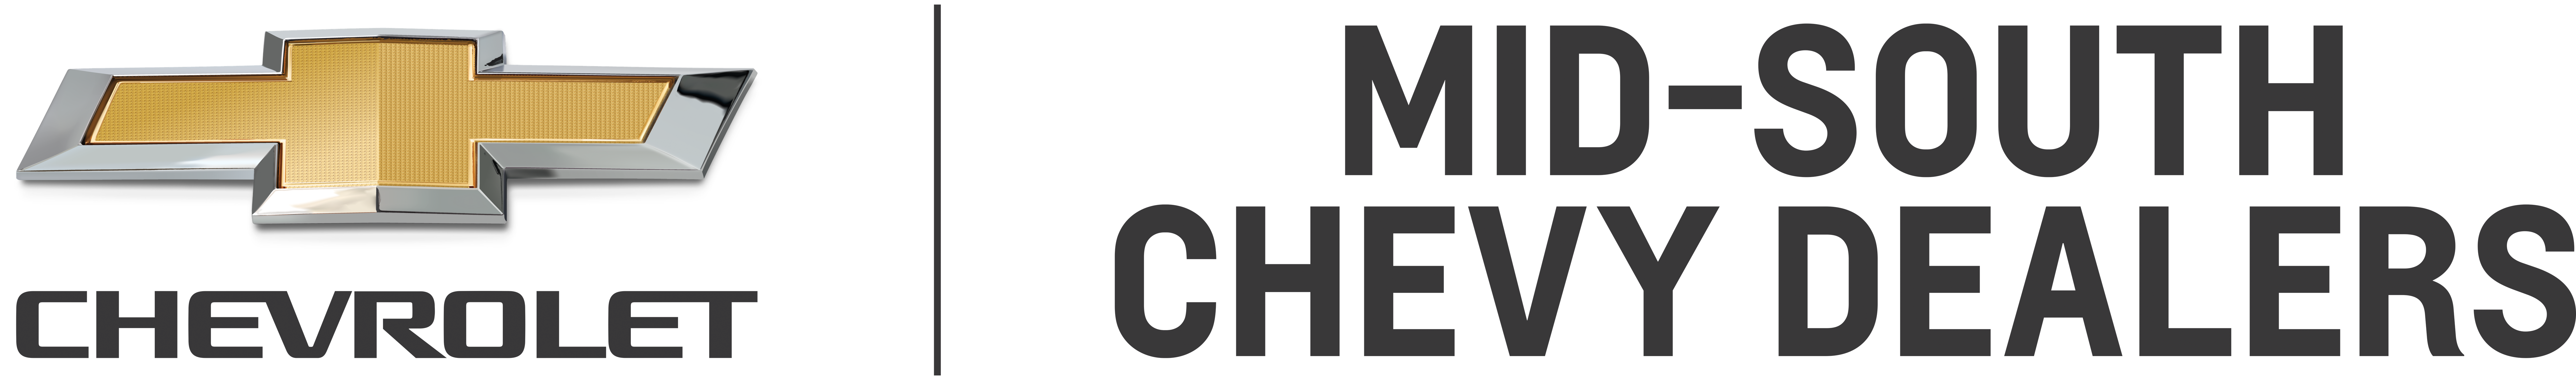 Mid South Chevy Dealers Logo